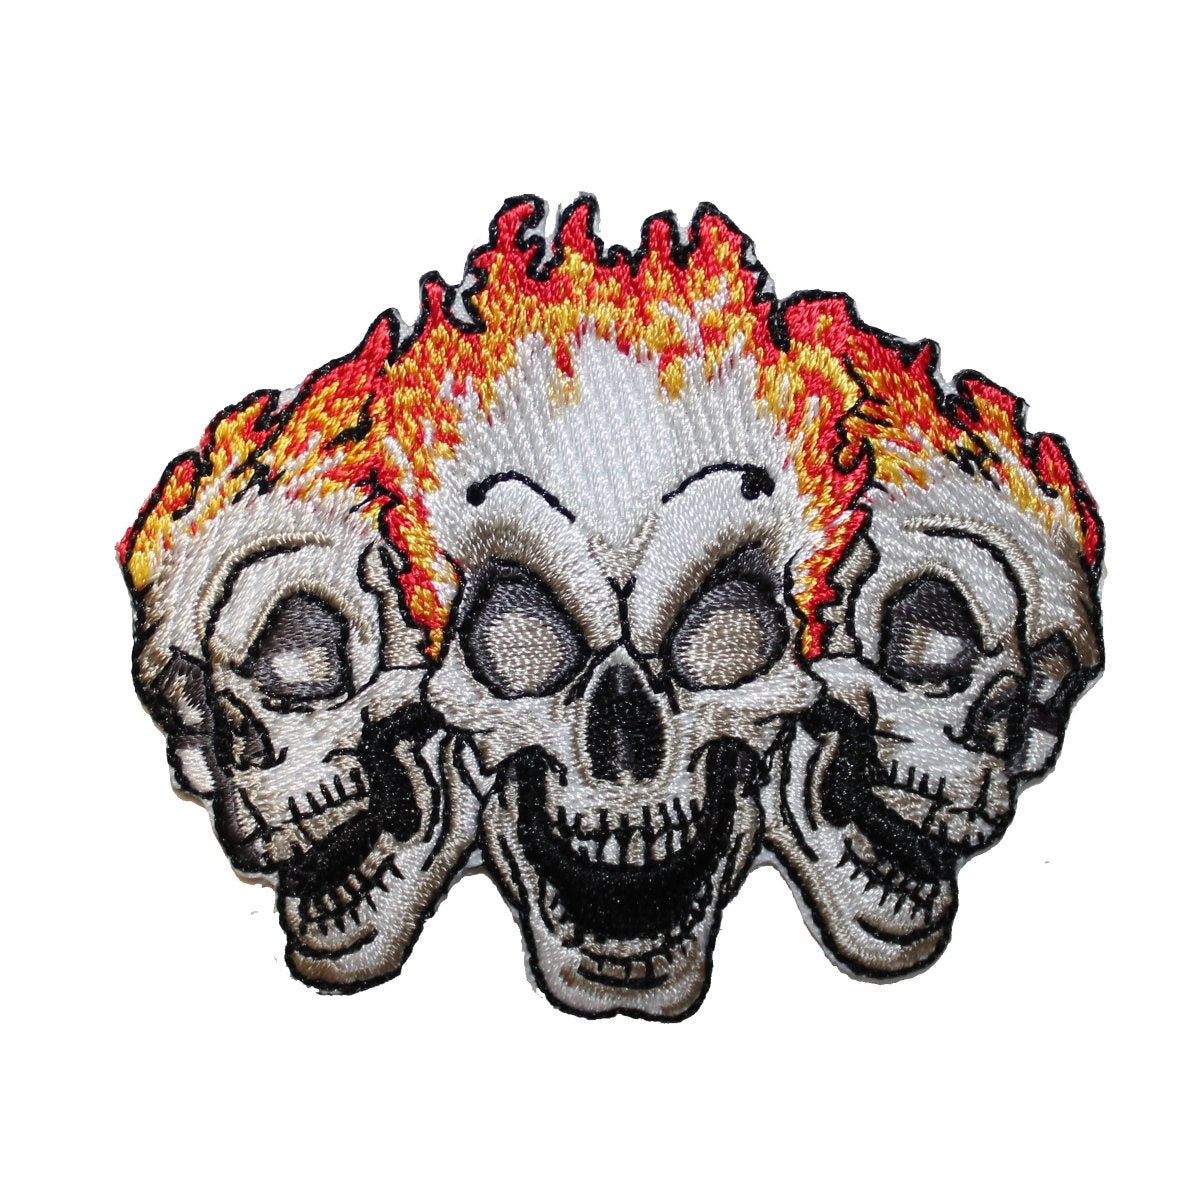 New Heart Barbed Wire Flames Fire Gothic Embroidered Biker Iron On Patch